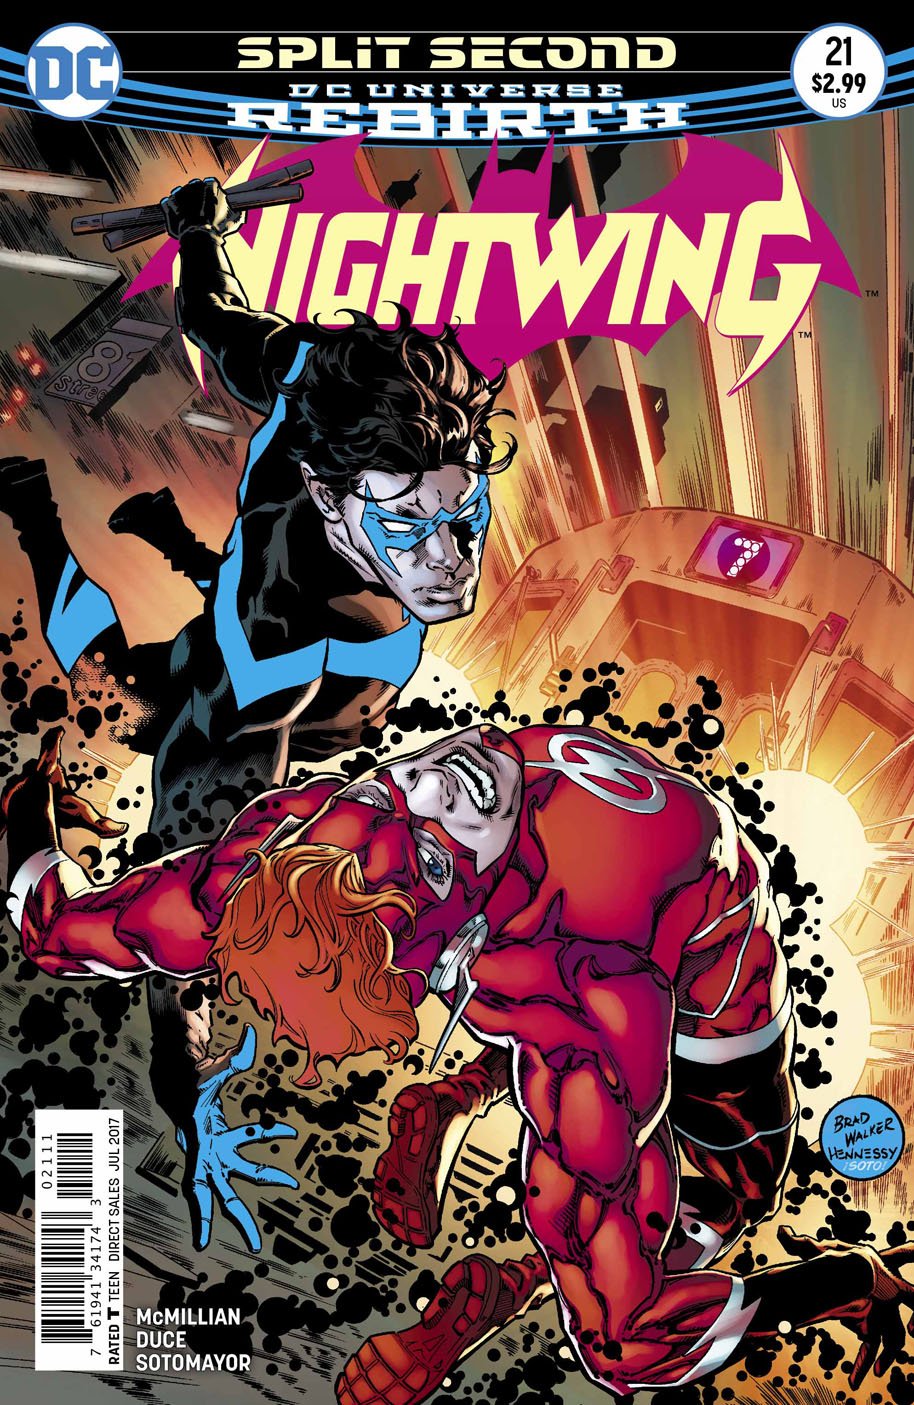 Nightwing #21 Review